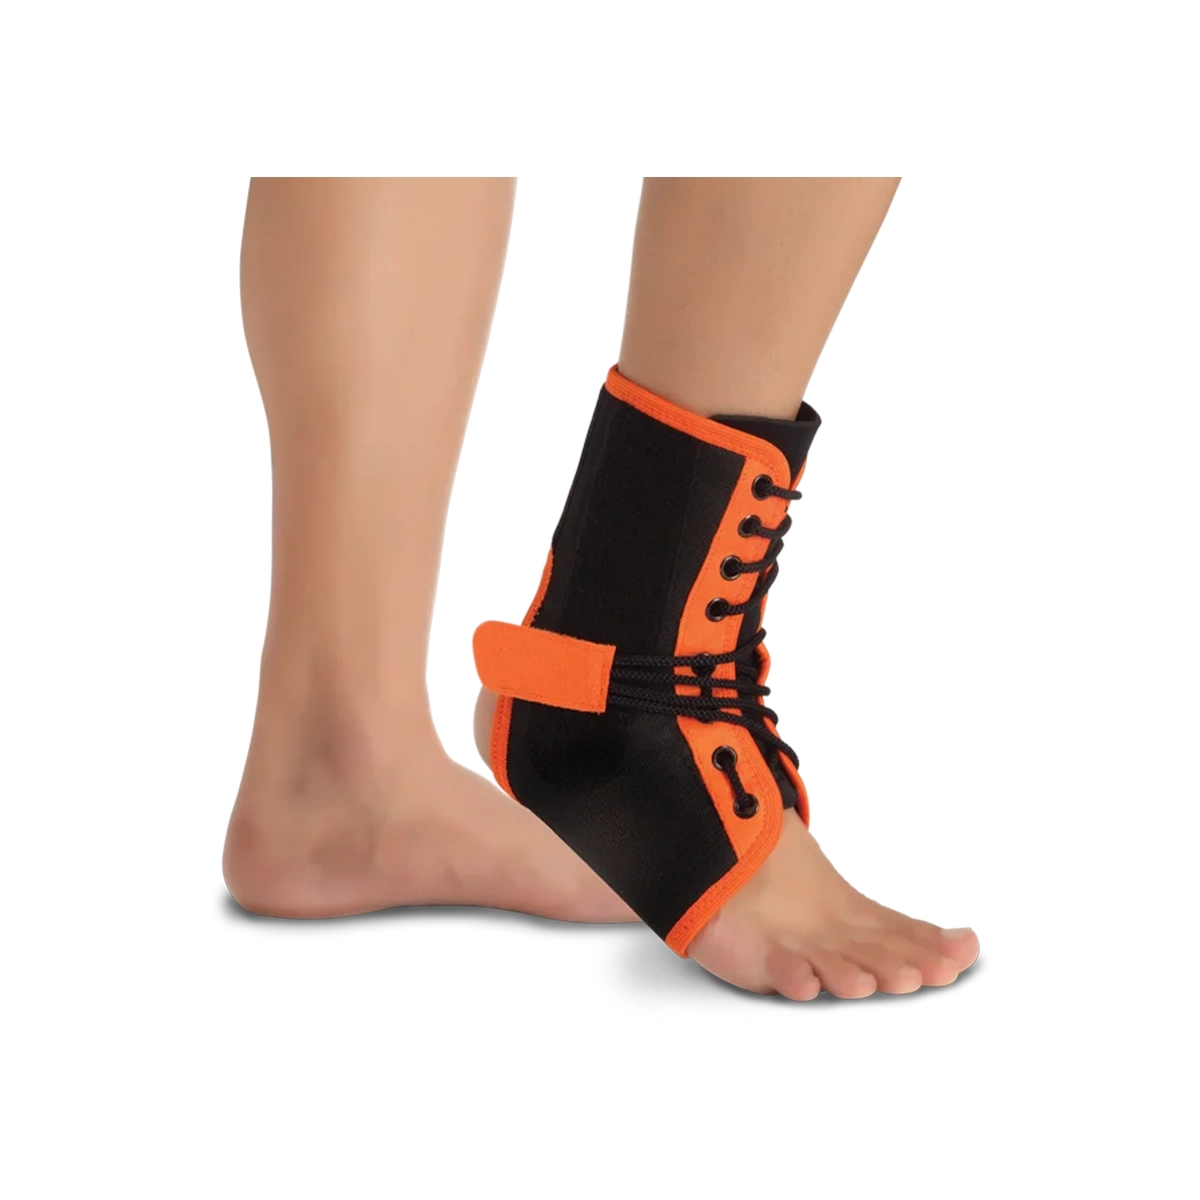 First product image of Flamingo Ankle Brace S